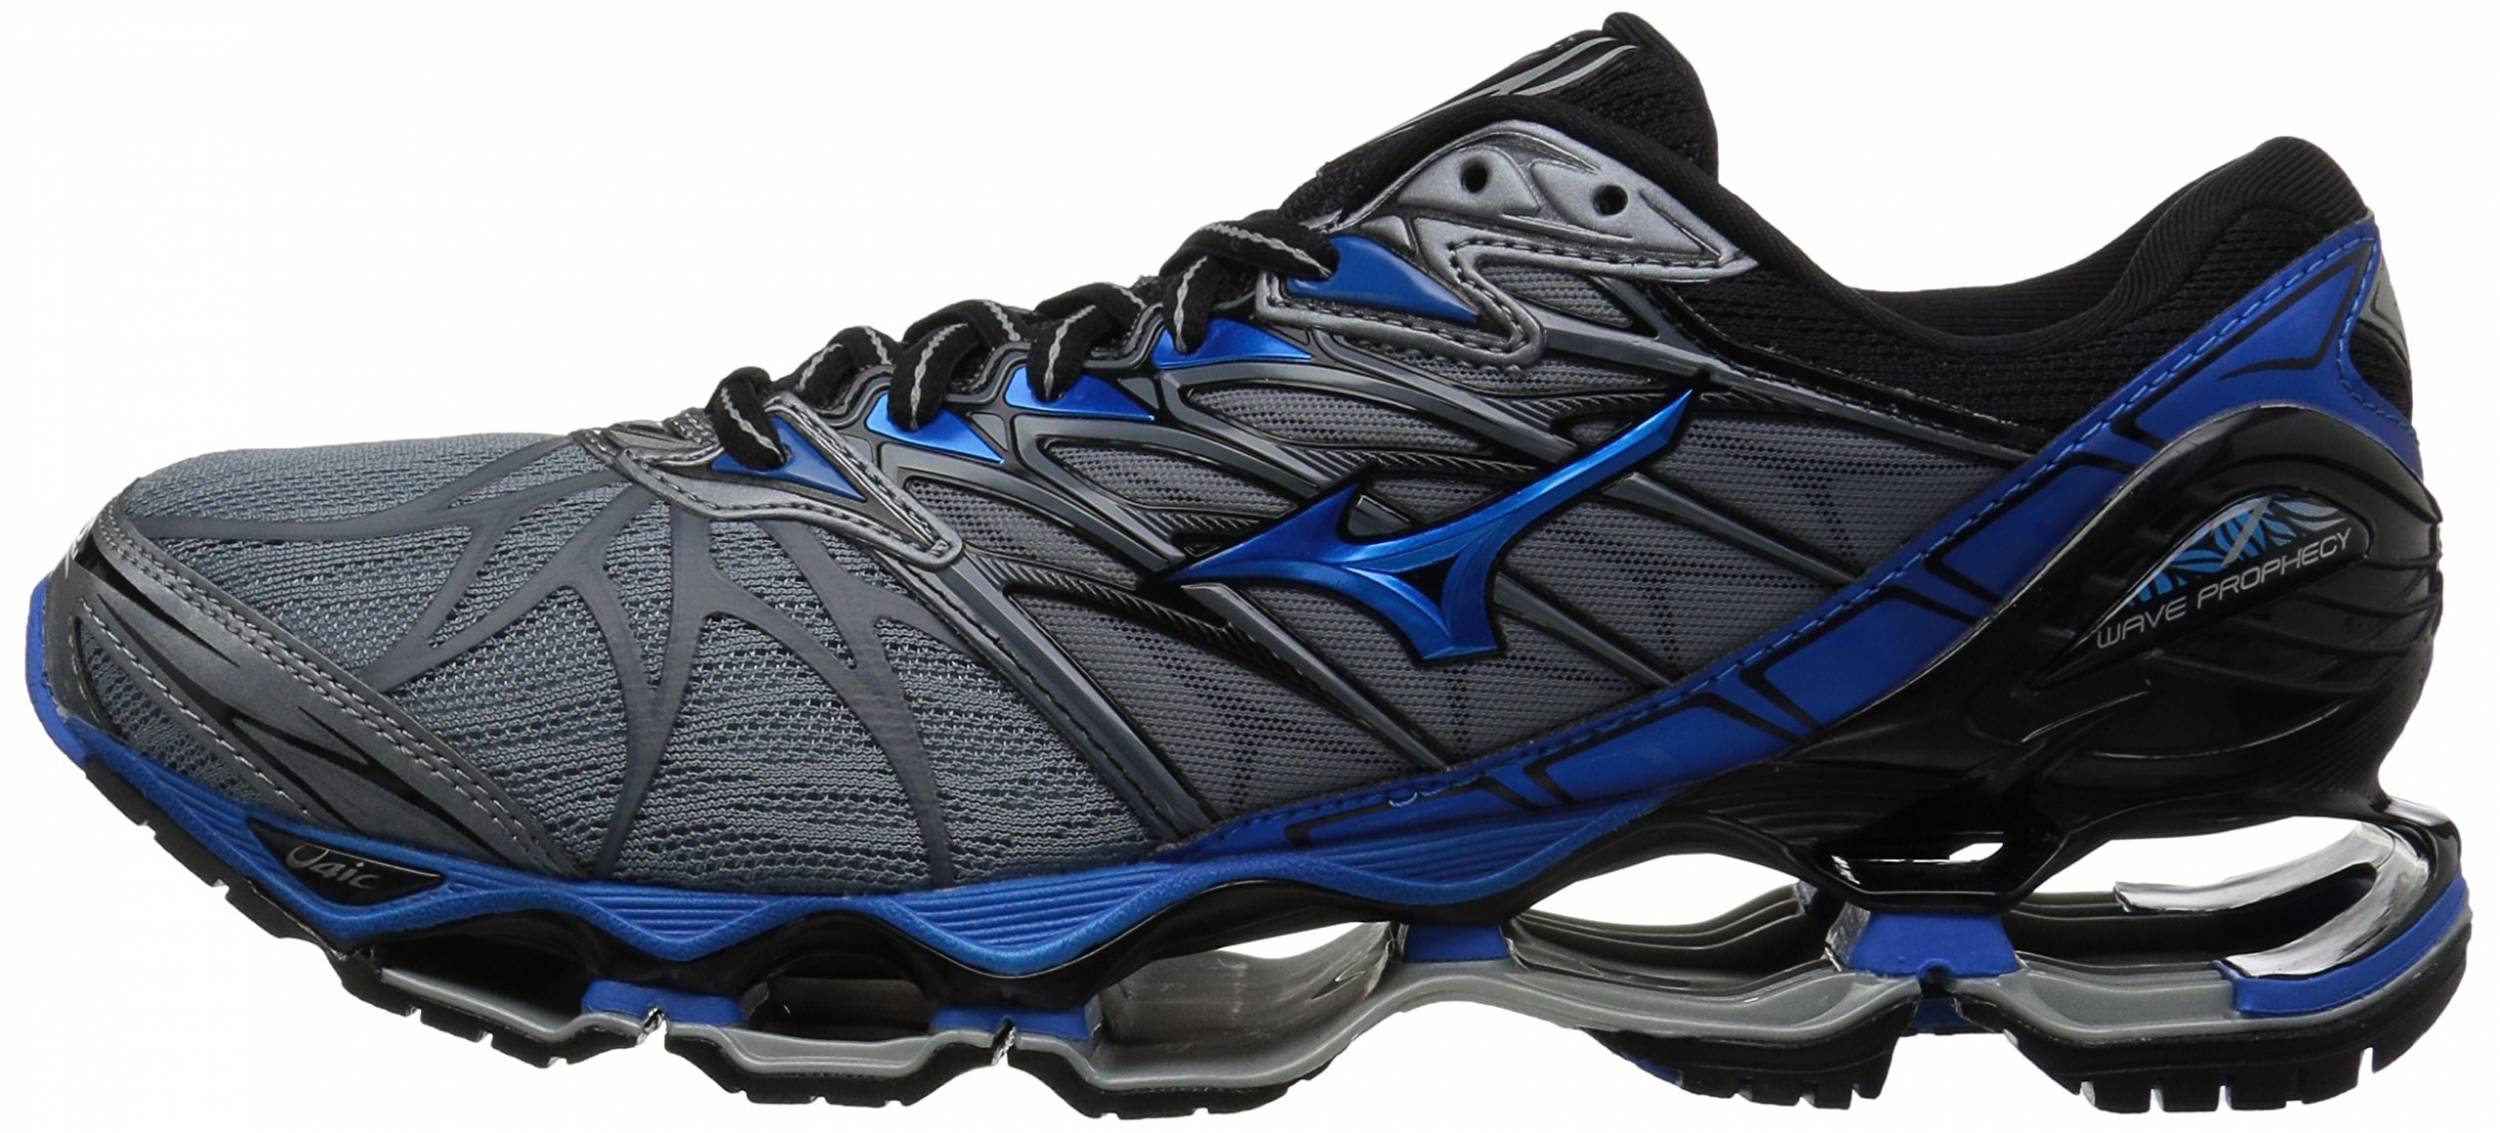 Mizuno Wave Prophecy 7 Men's Shoes Running Breathable Athletic Professional Men 